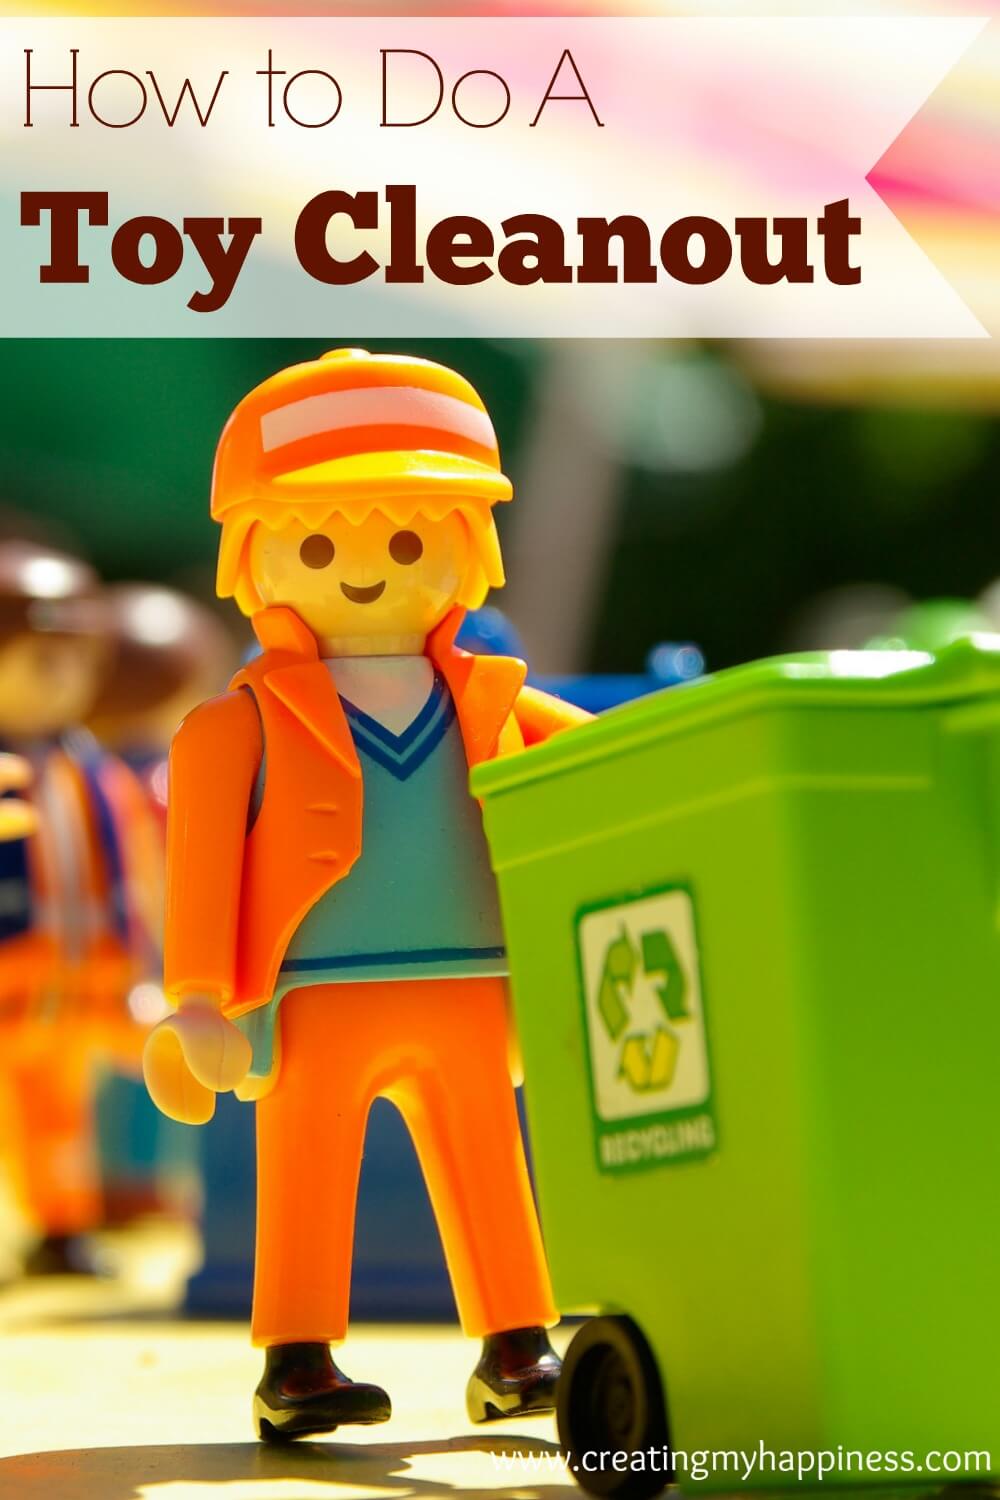 If toys are taking over your house, follow these simple tips to managing a toy cleanout. 